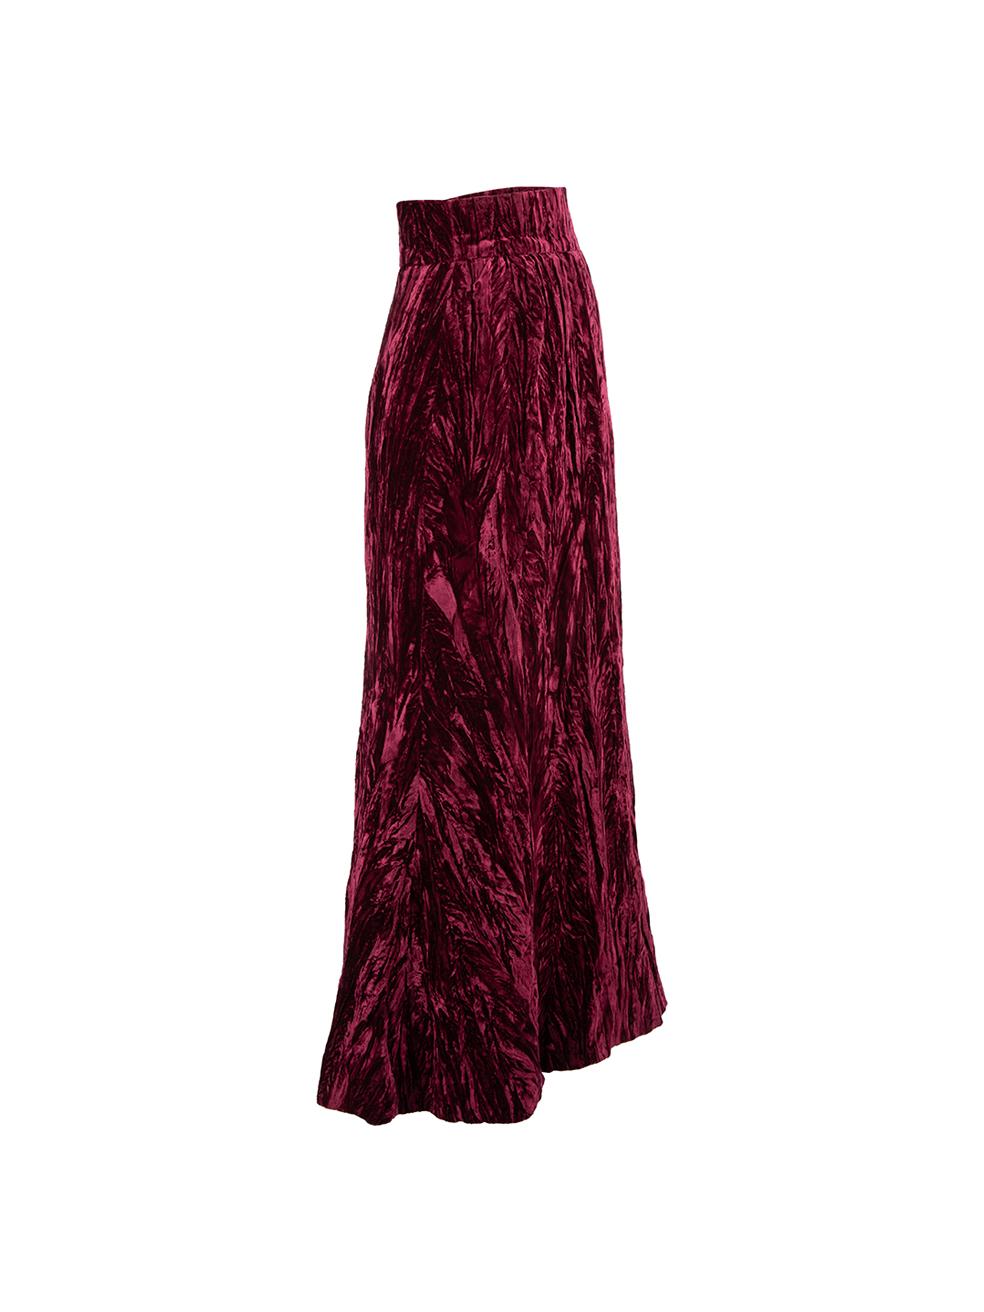 CONDITION is Very good. Hardly any visible wear to skirt is evident on this used Saint Laurent Rive Gauche designer resale item.
  
Details
Vintage
Burgundy
Velvet
Maxi straight skirt
Crushed texture
Side zip closure with clasps
  
Made in France
 